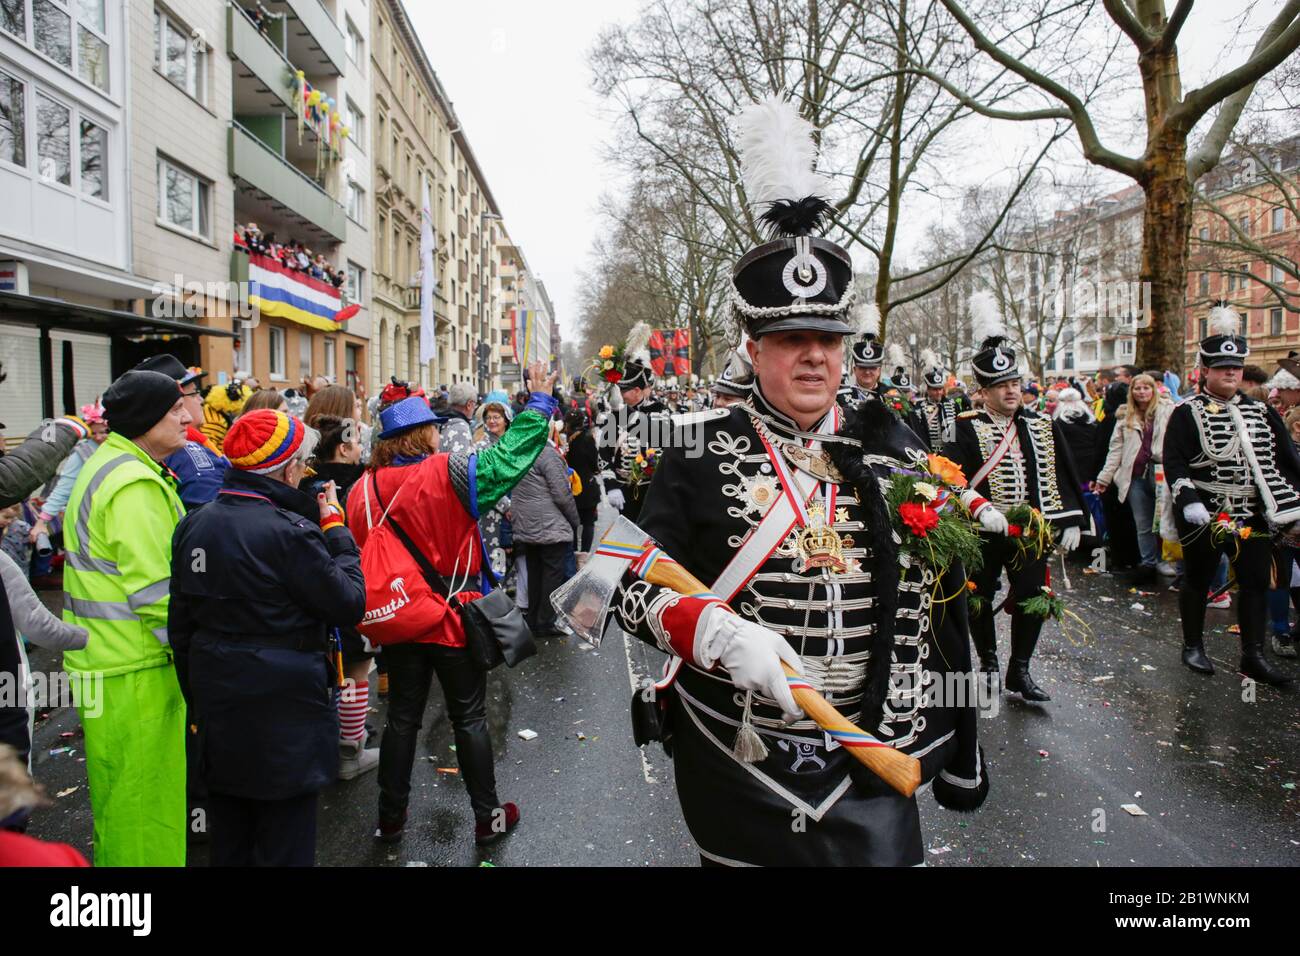 Mainz, Germany. 24th February 2020. Members of the carnival guards Schwarze Husaren Mainz march in the Mainz Rose Monday parade. Around half a million people lined the streets of Mainz for the traditional Rose Monday Carnival Parade. The 9 km long parade with over 9,000 participants is one of the three large Rose Monday Parades in Germany. Stock Photo